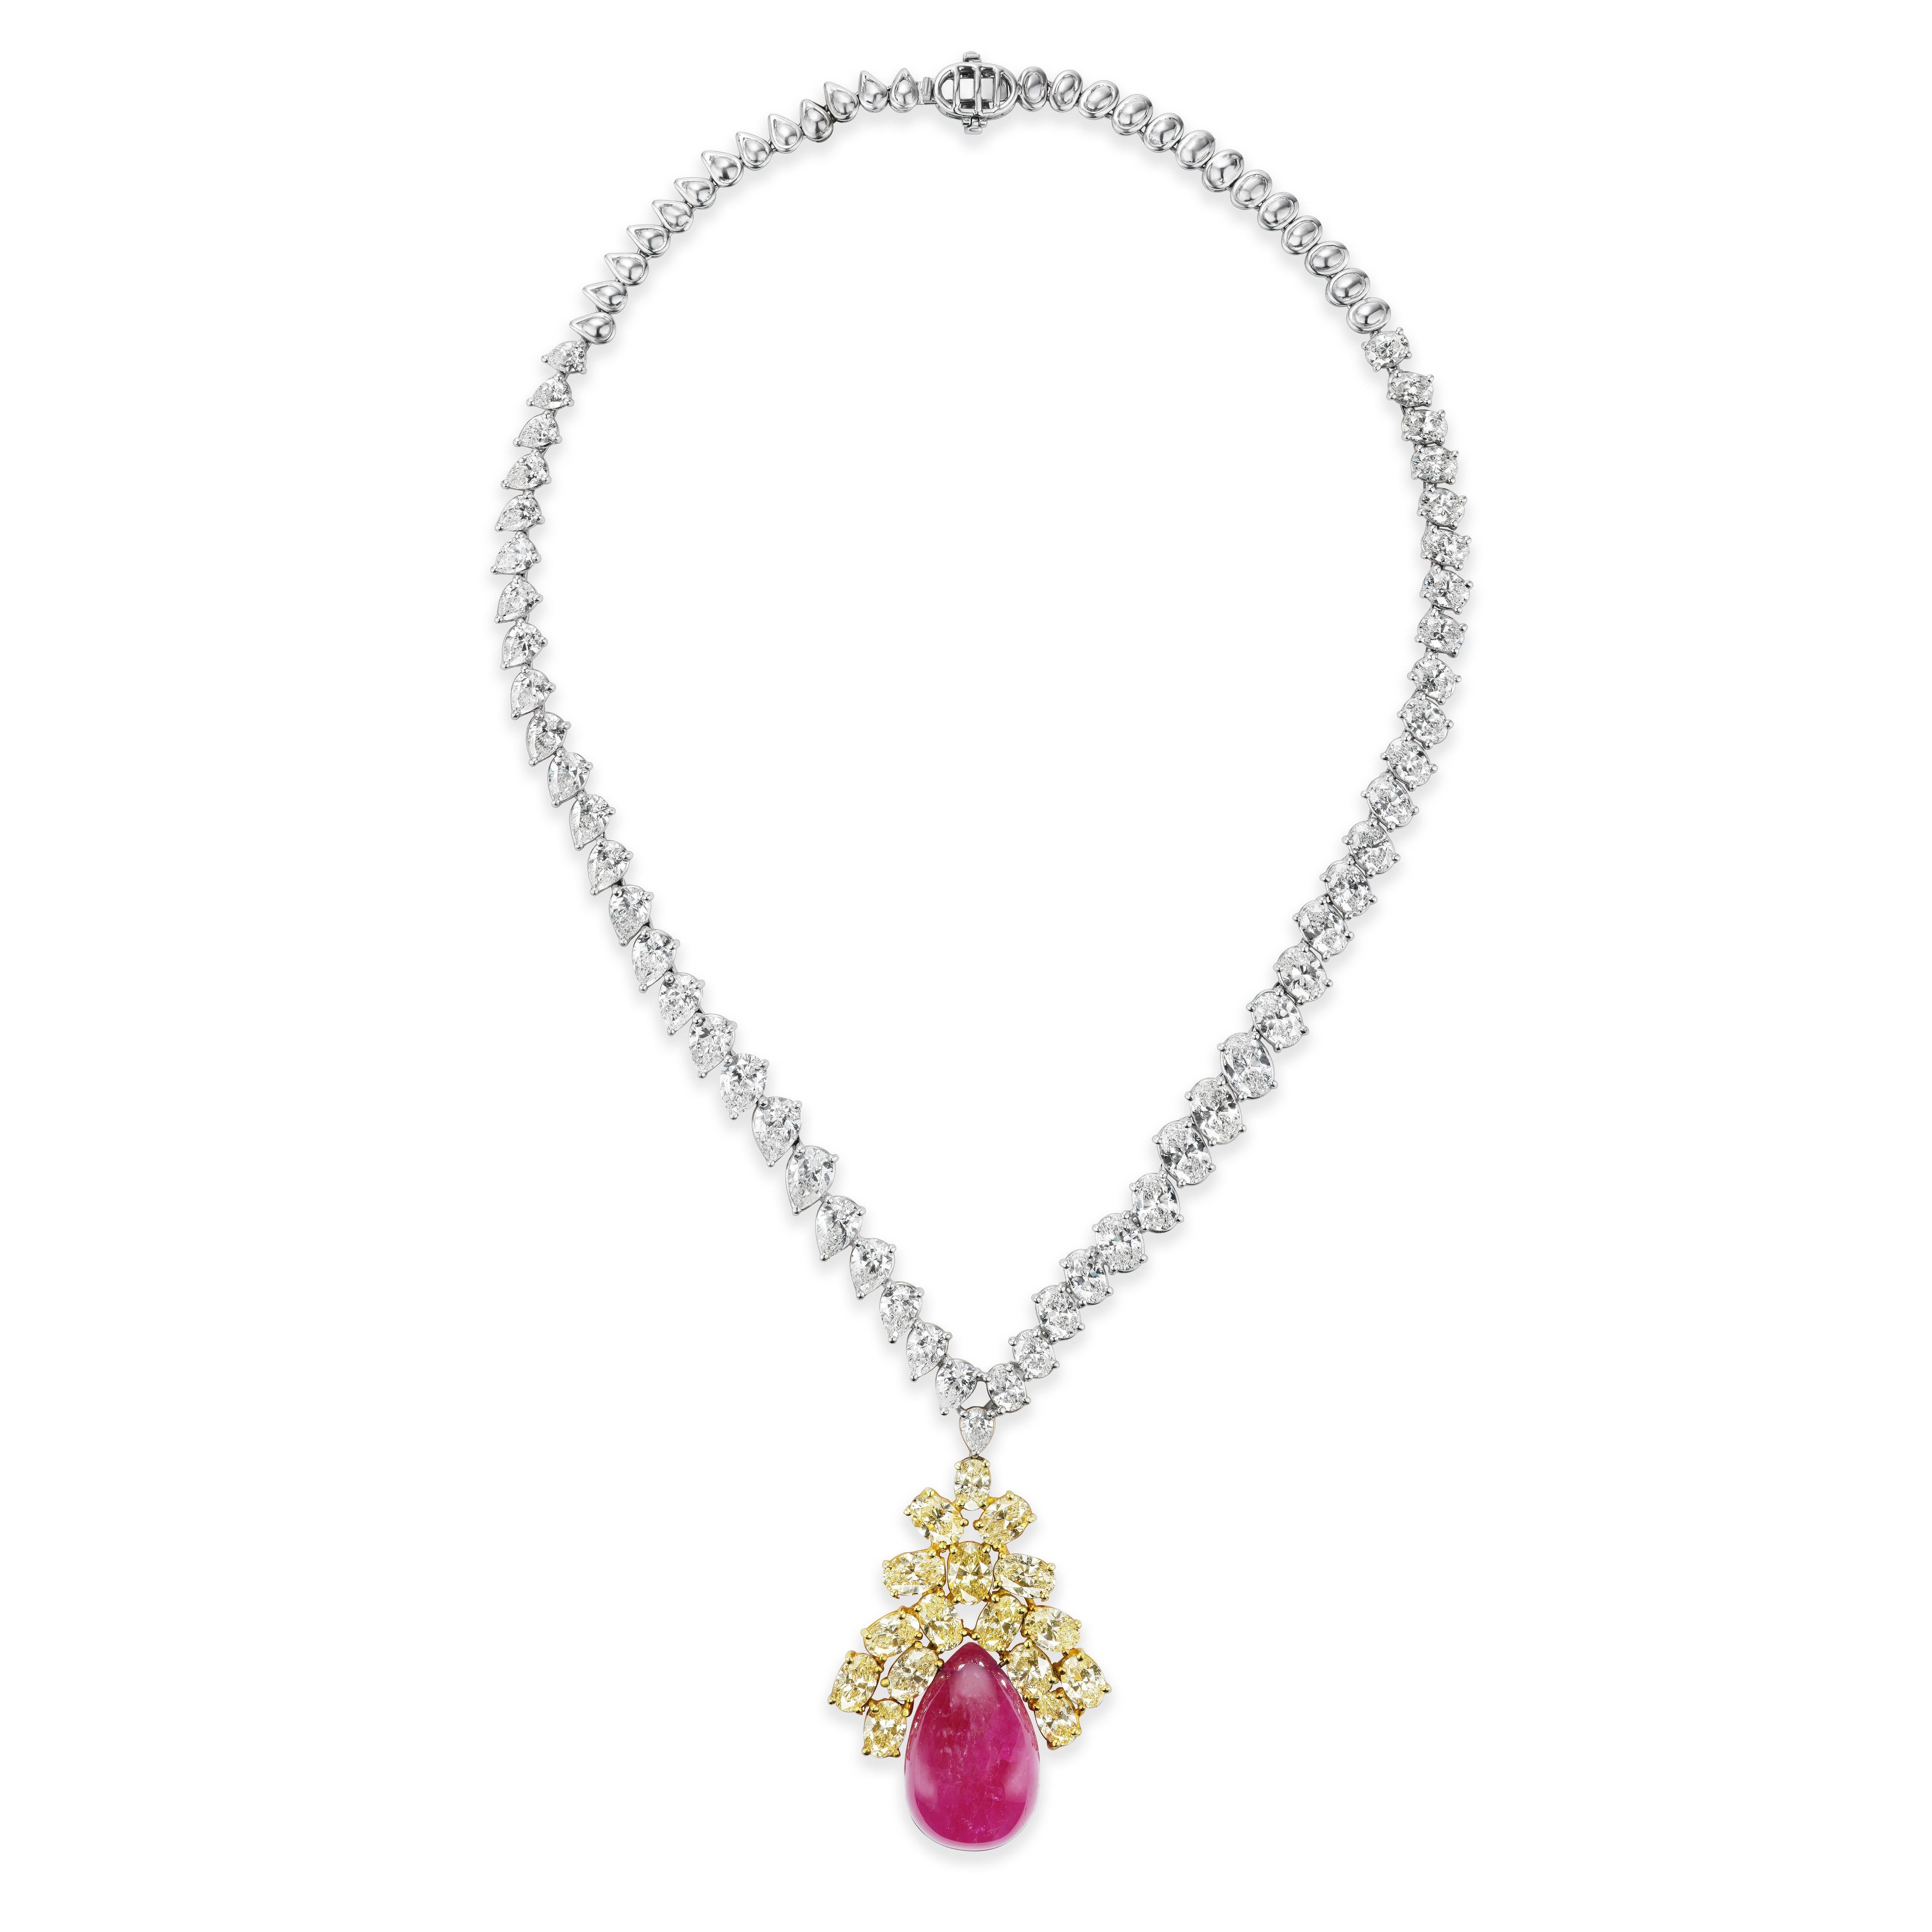 A lovely combination or colors, this necklace features fancy yellow and white diamonds alongside a set of exquisite and rare large ruby cabochons. The parure is glamorous and drool-worthy with its uniqueness and rarity.

Gemstones Type: Natural Ruby